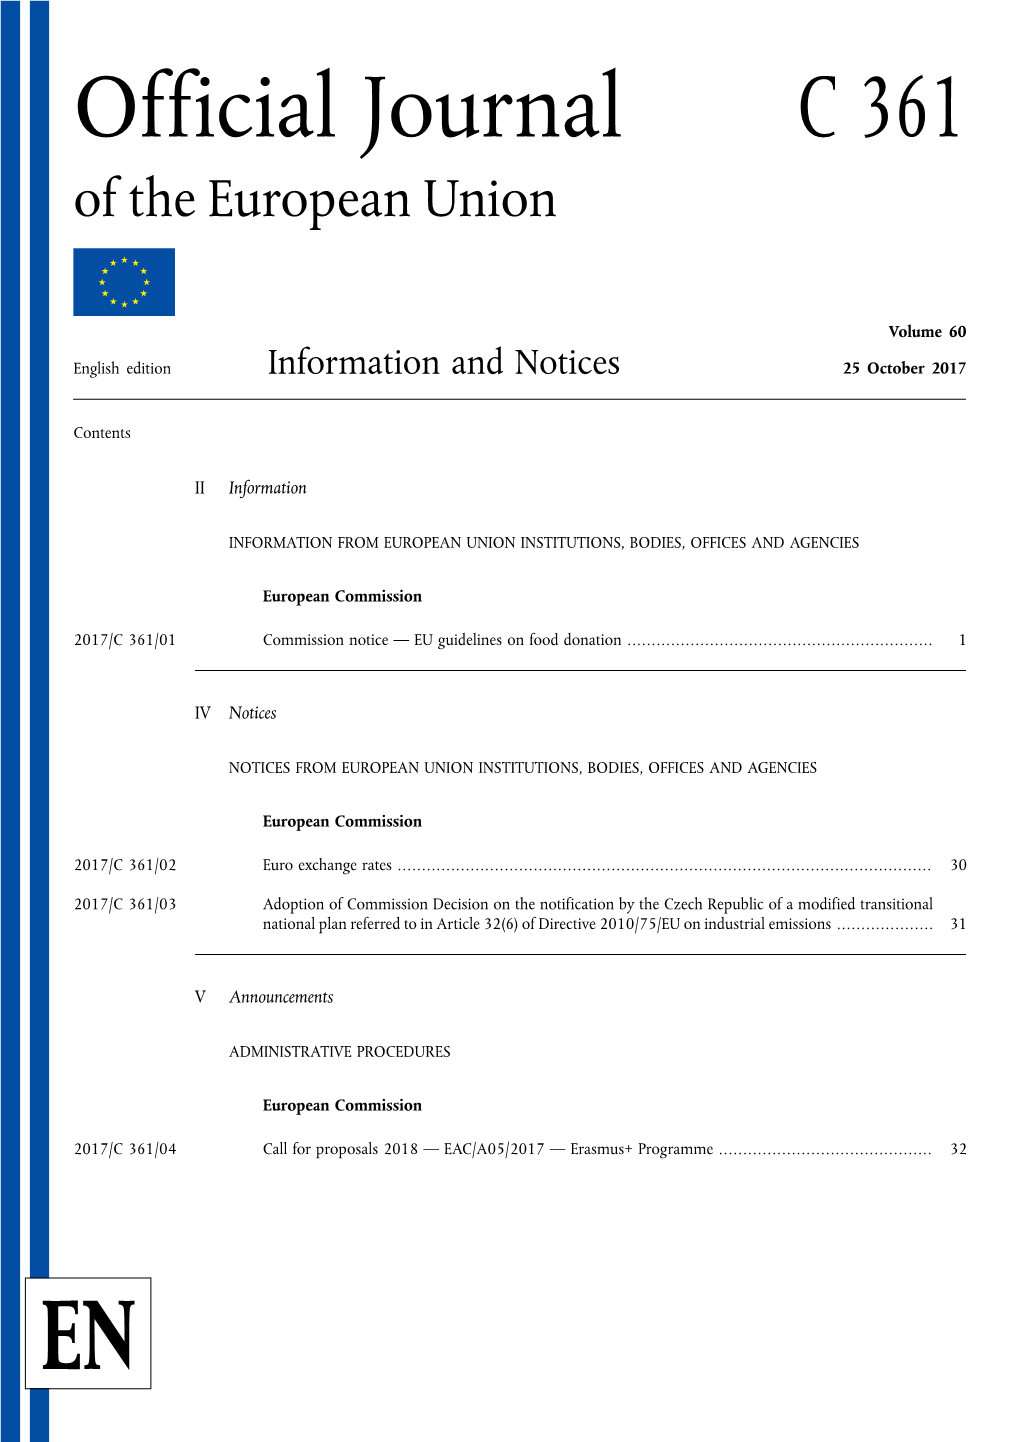 Official Journal C 361 of the European Union